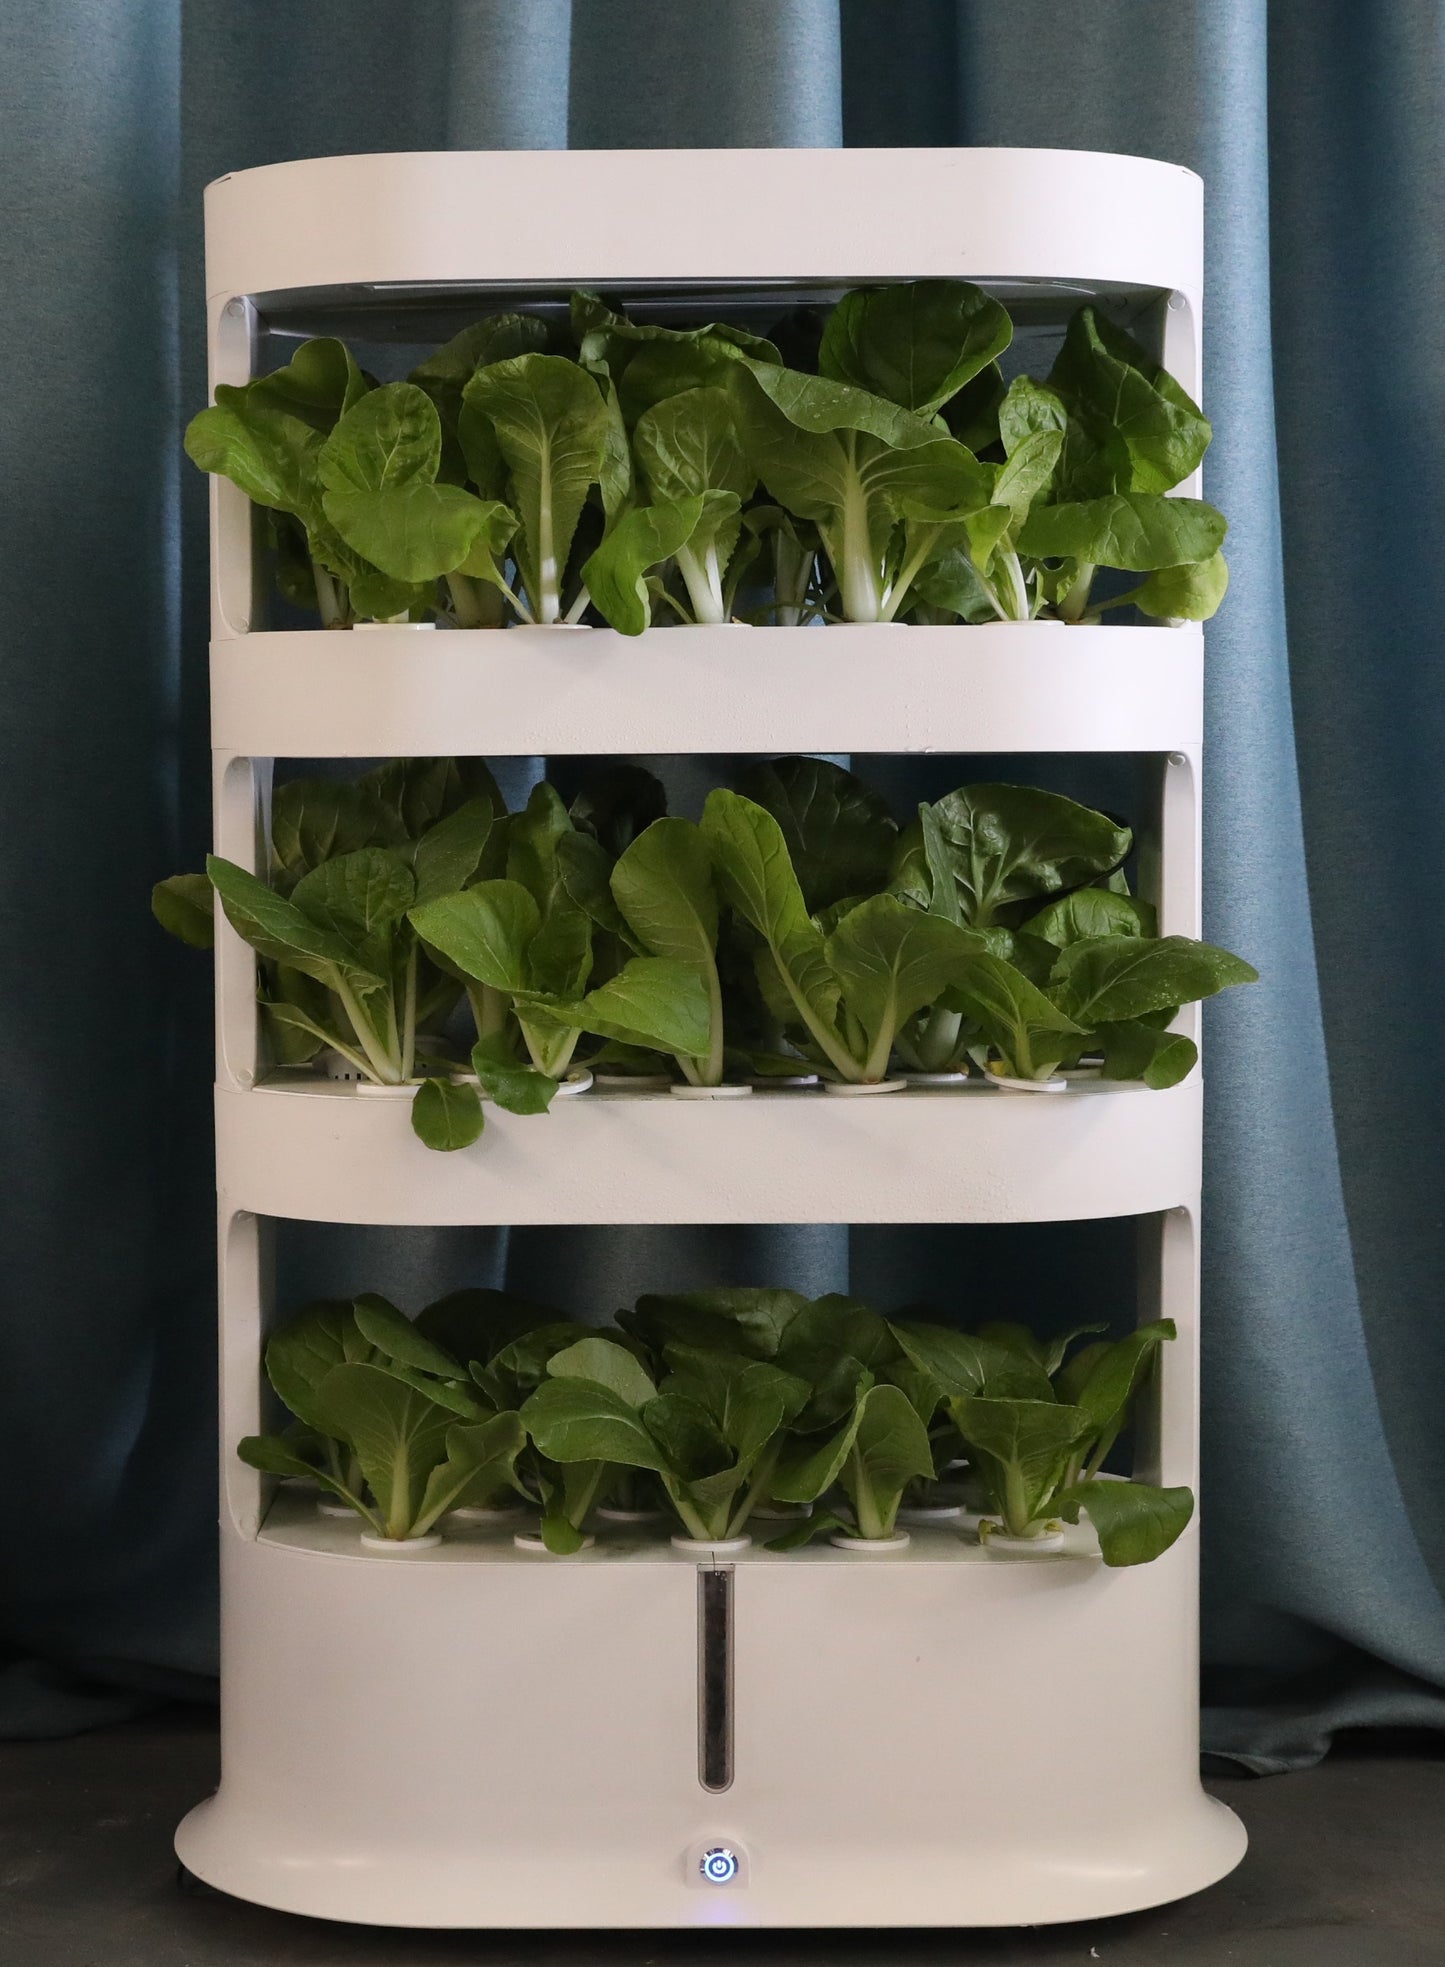 Indoor Hydroponic Grow System - 48 Spaces - Remote Controlled Grow Lights & Pump